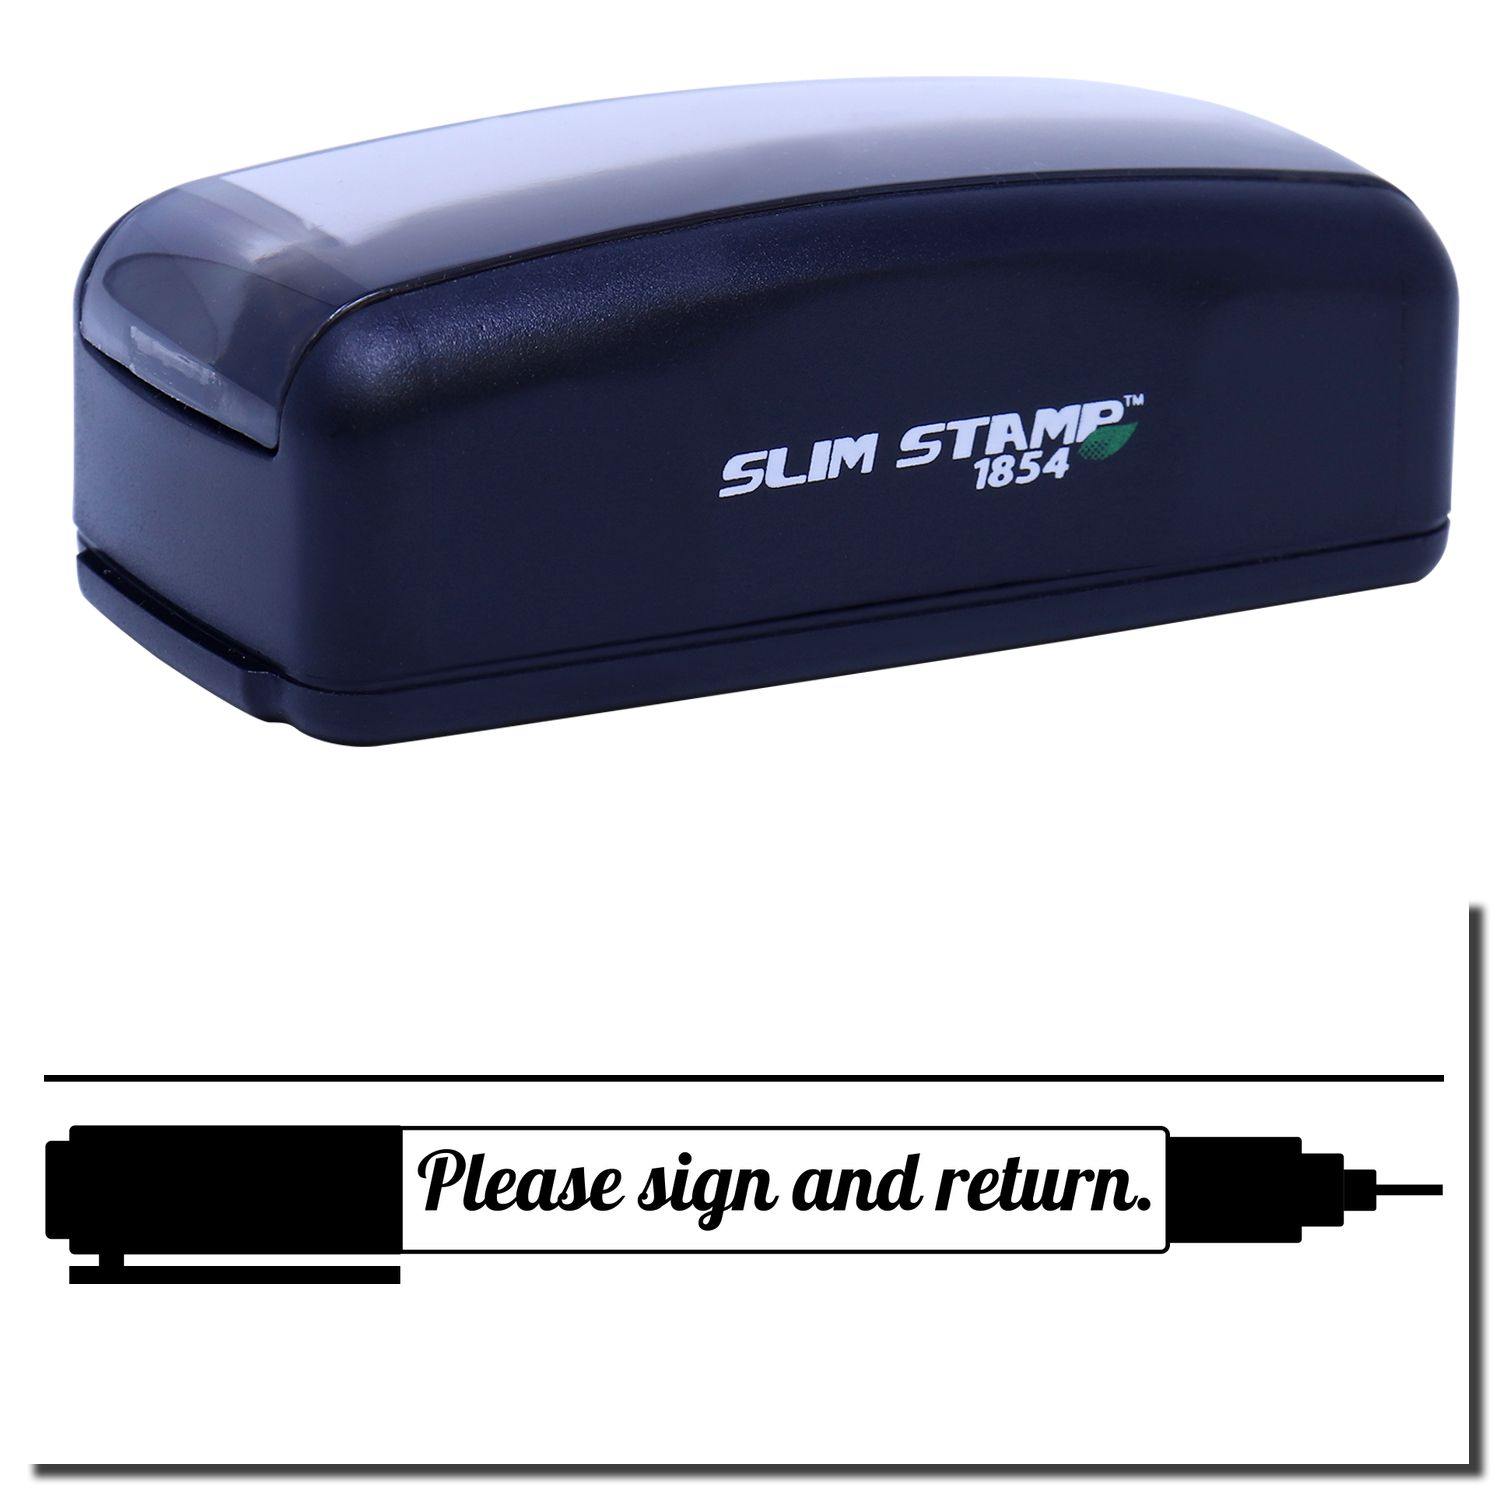 A pre-inked stamp with a stamped image showing how the text "Please sign and return." in a large cursive font with an image of a pen and a line on the top of the text is displayed after stamping from it.